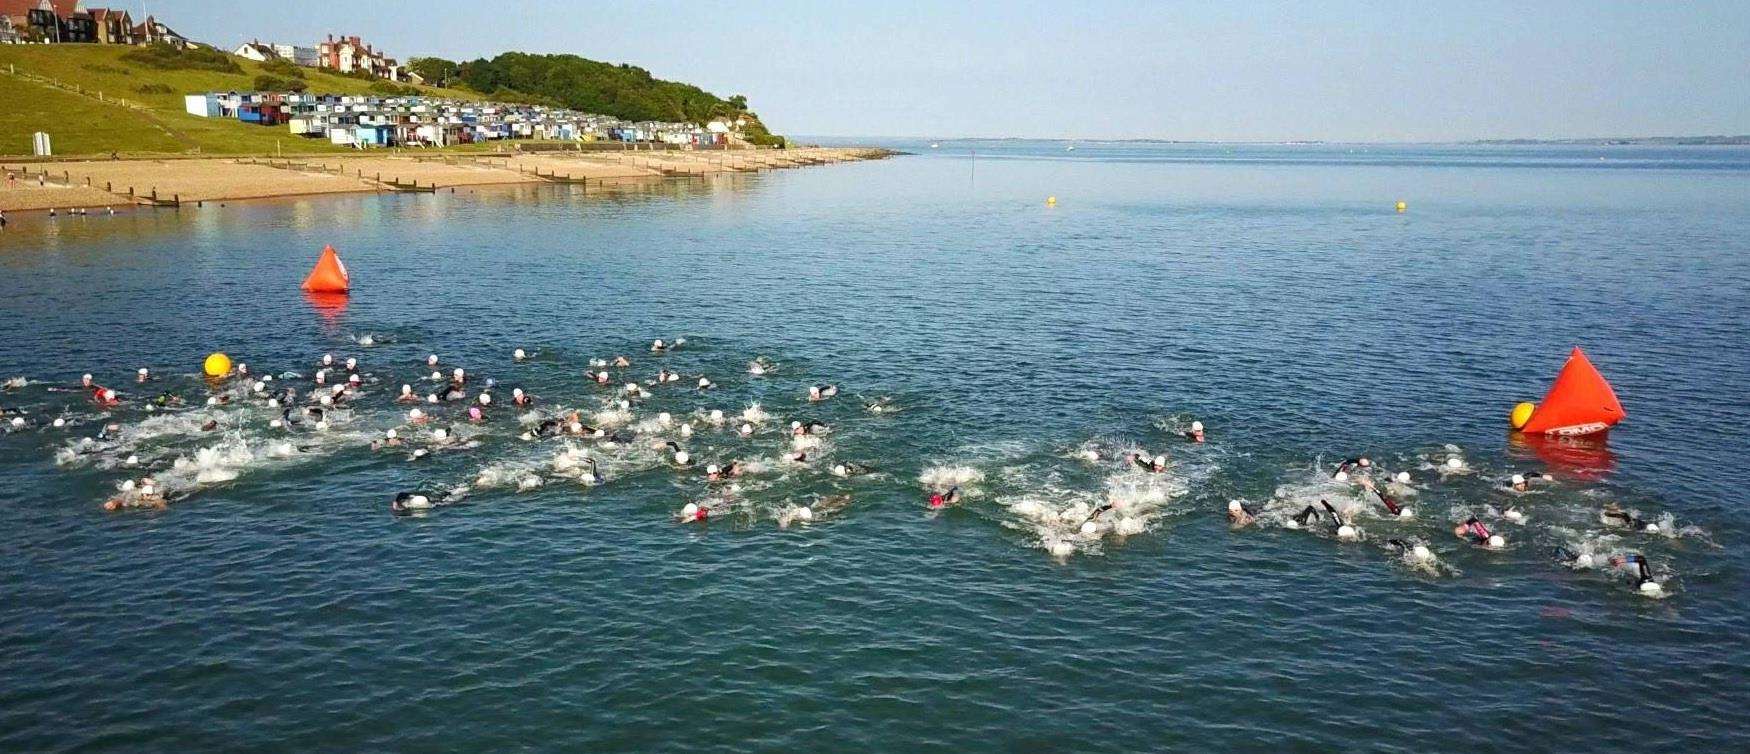 Competitors take part in last year's Oysterman Triathlon